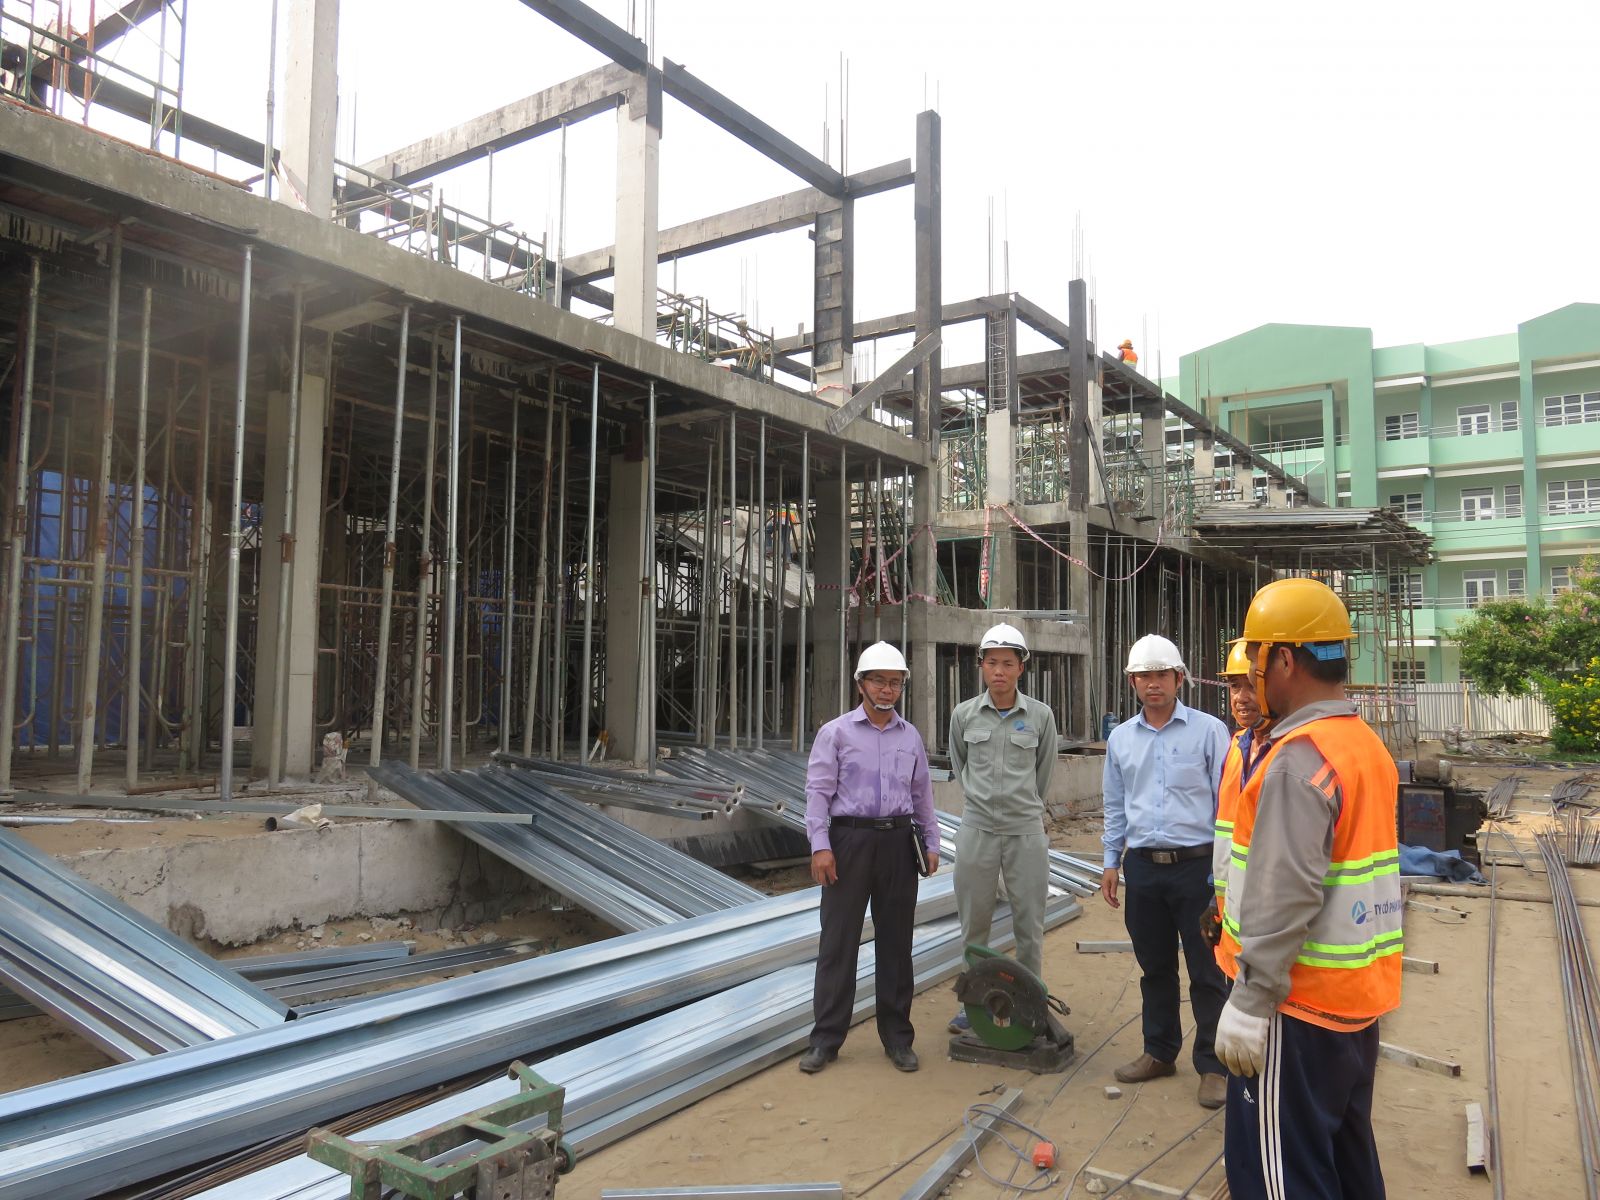 Long An Vocational College's Administrative Block Project (phase 2) has good construction progress and disbursement in the first quarter